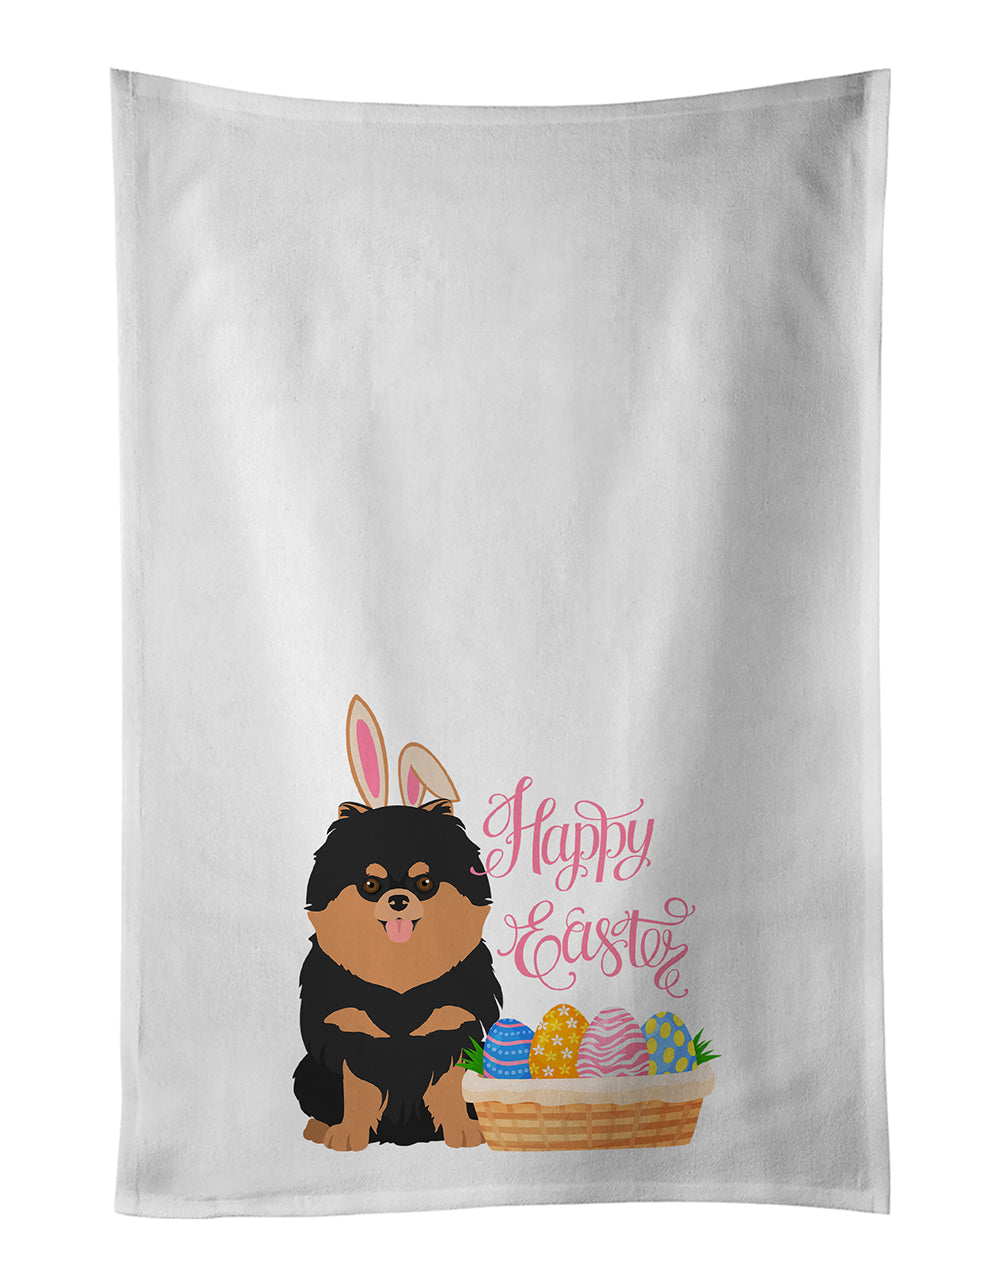 Buy this Black and Tan Pomeranian Easter White Kitchen Towel Set of 2 Dish Towels